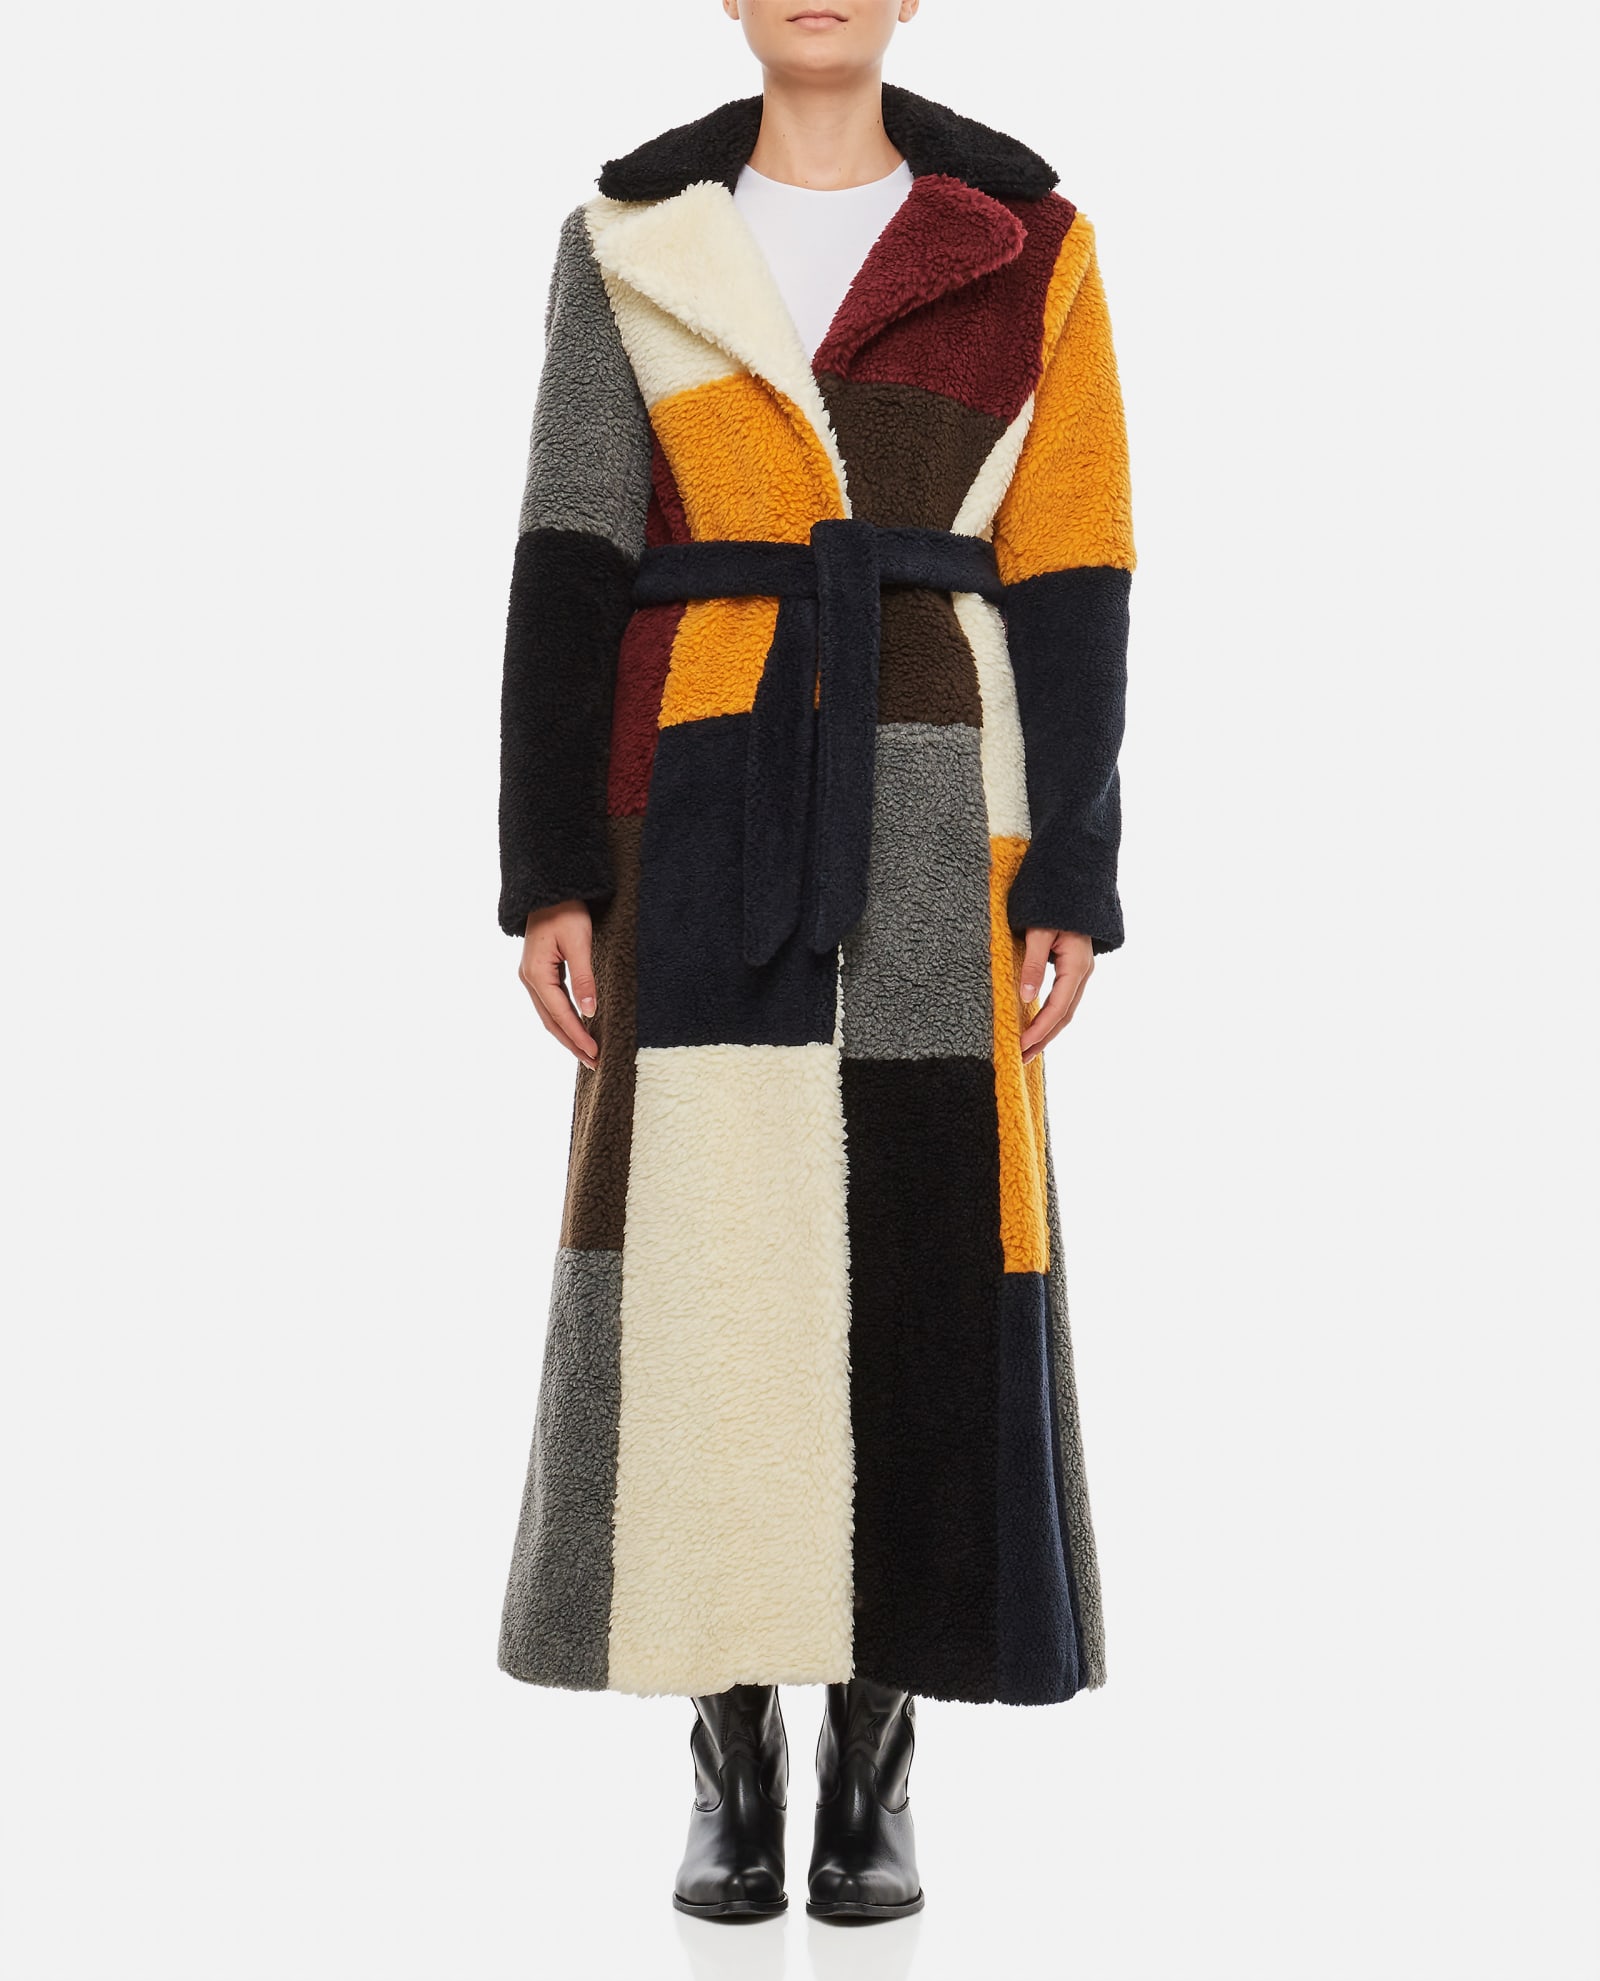 IRIE PATCHWORK SHEARLING COAT